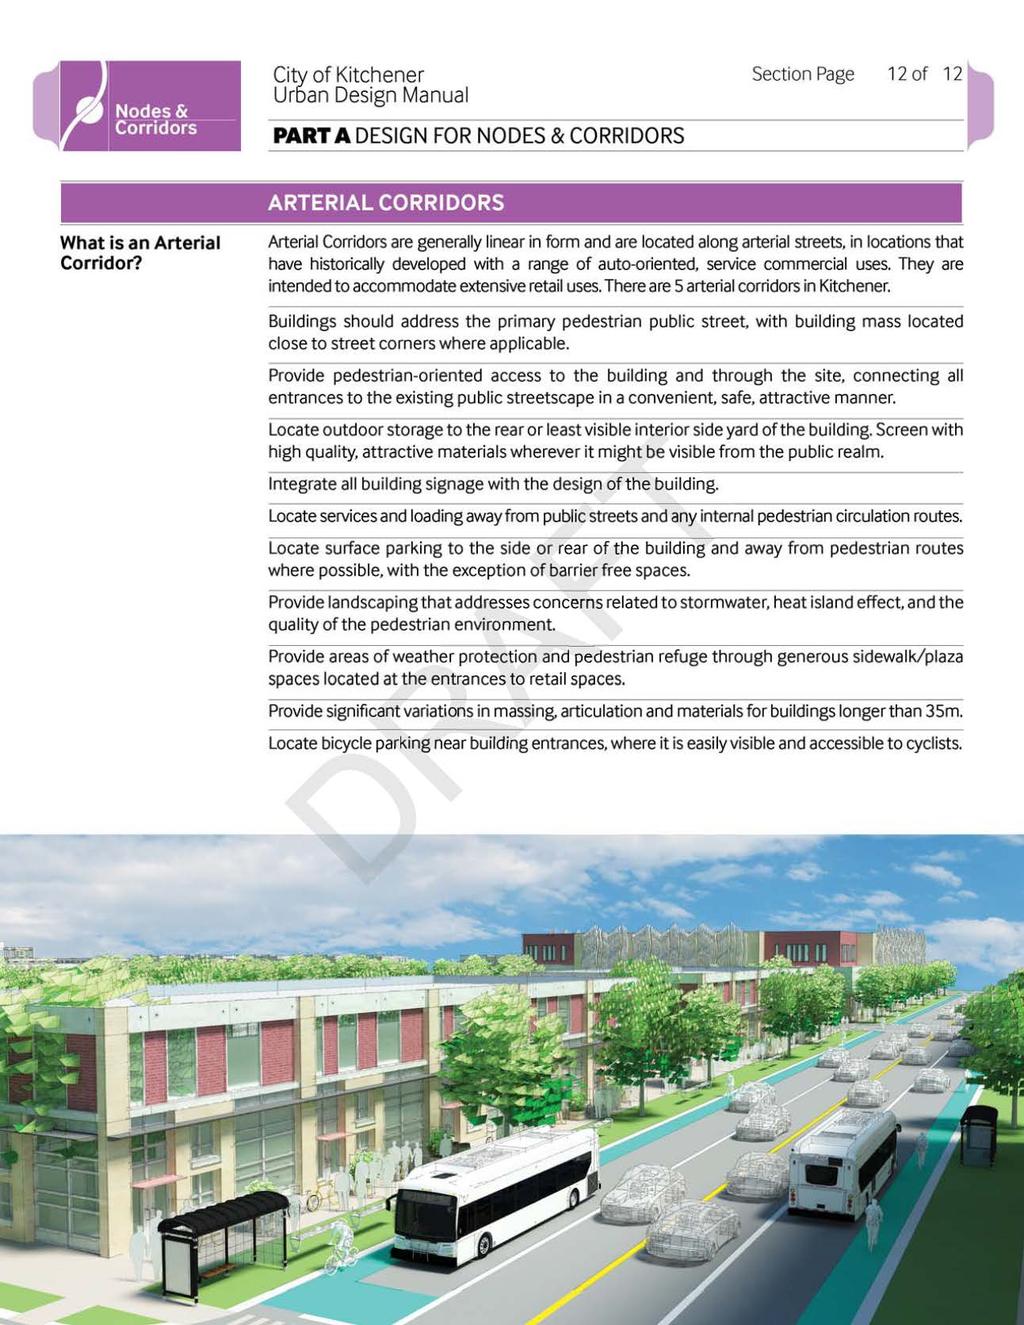 Section Page 12 of 12 ARTERIAL CORRIDORS What is an Arterial Corridor?